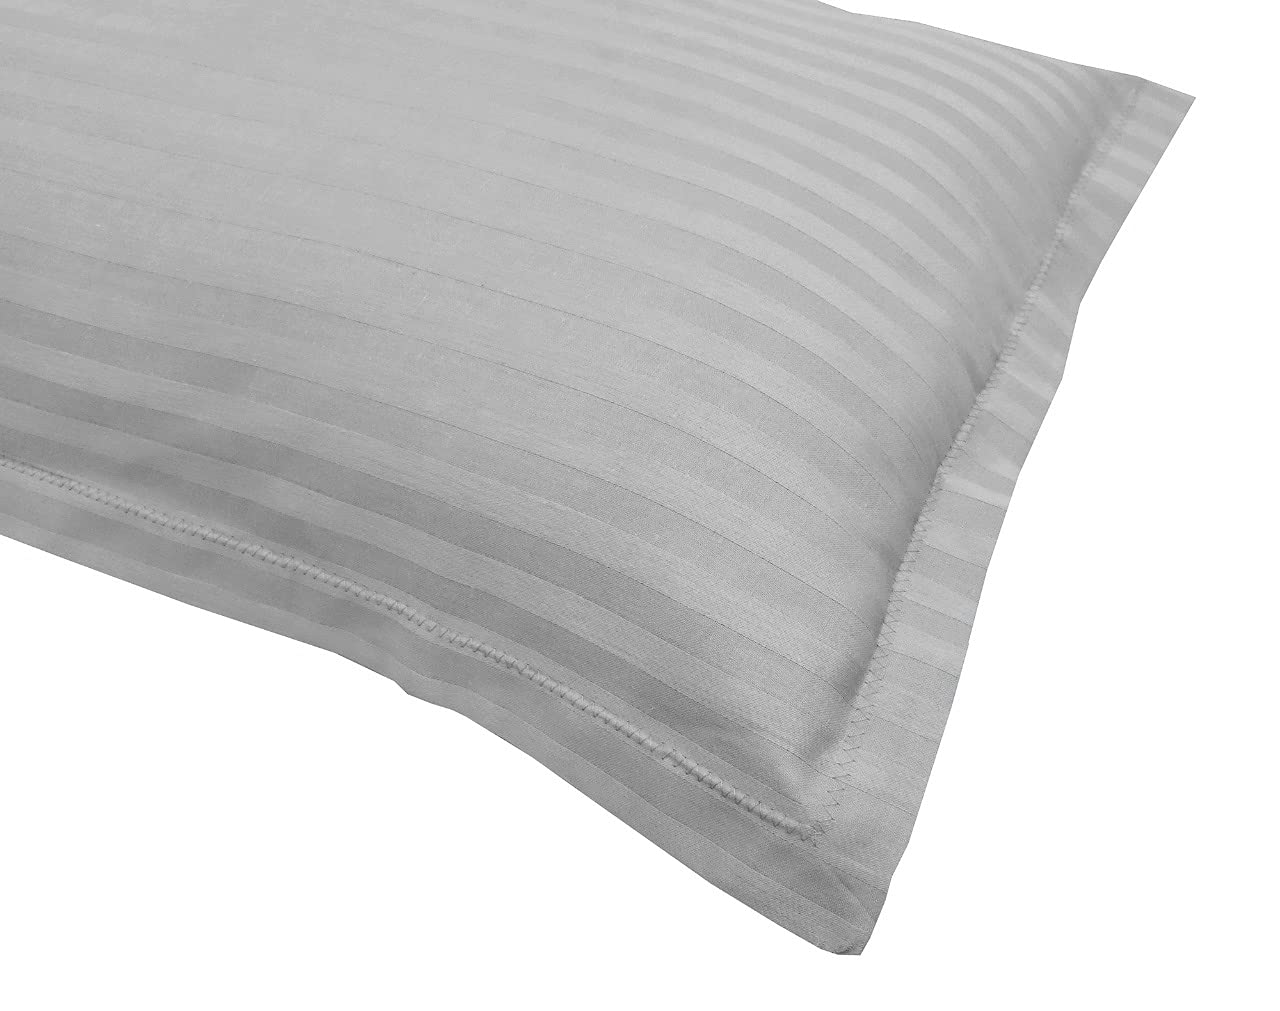 Cotton striped pillow cover